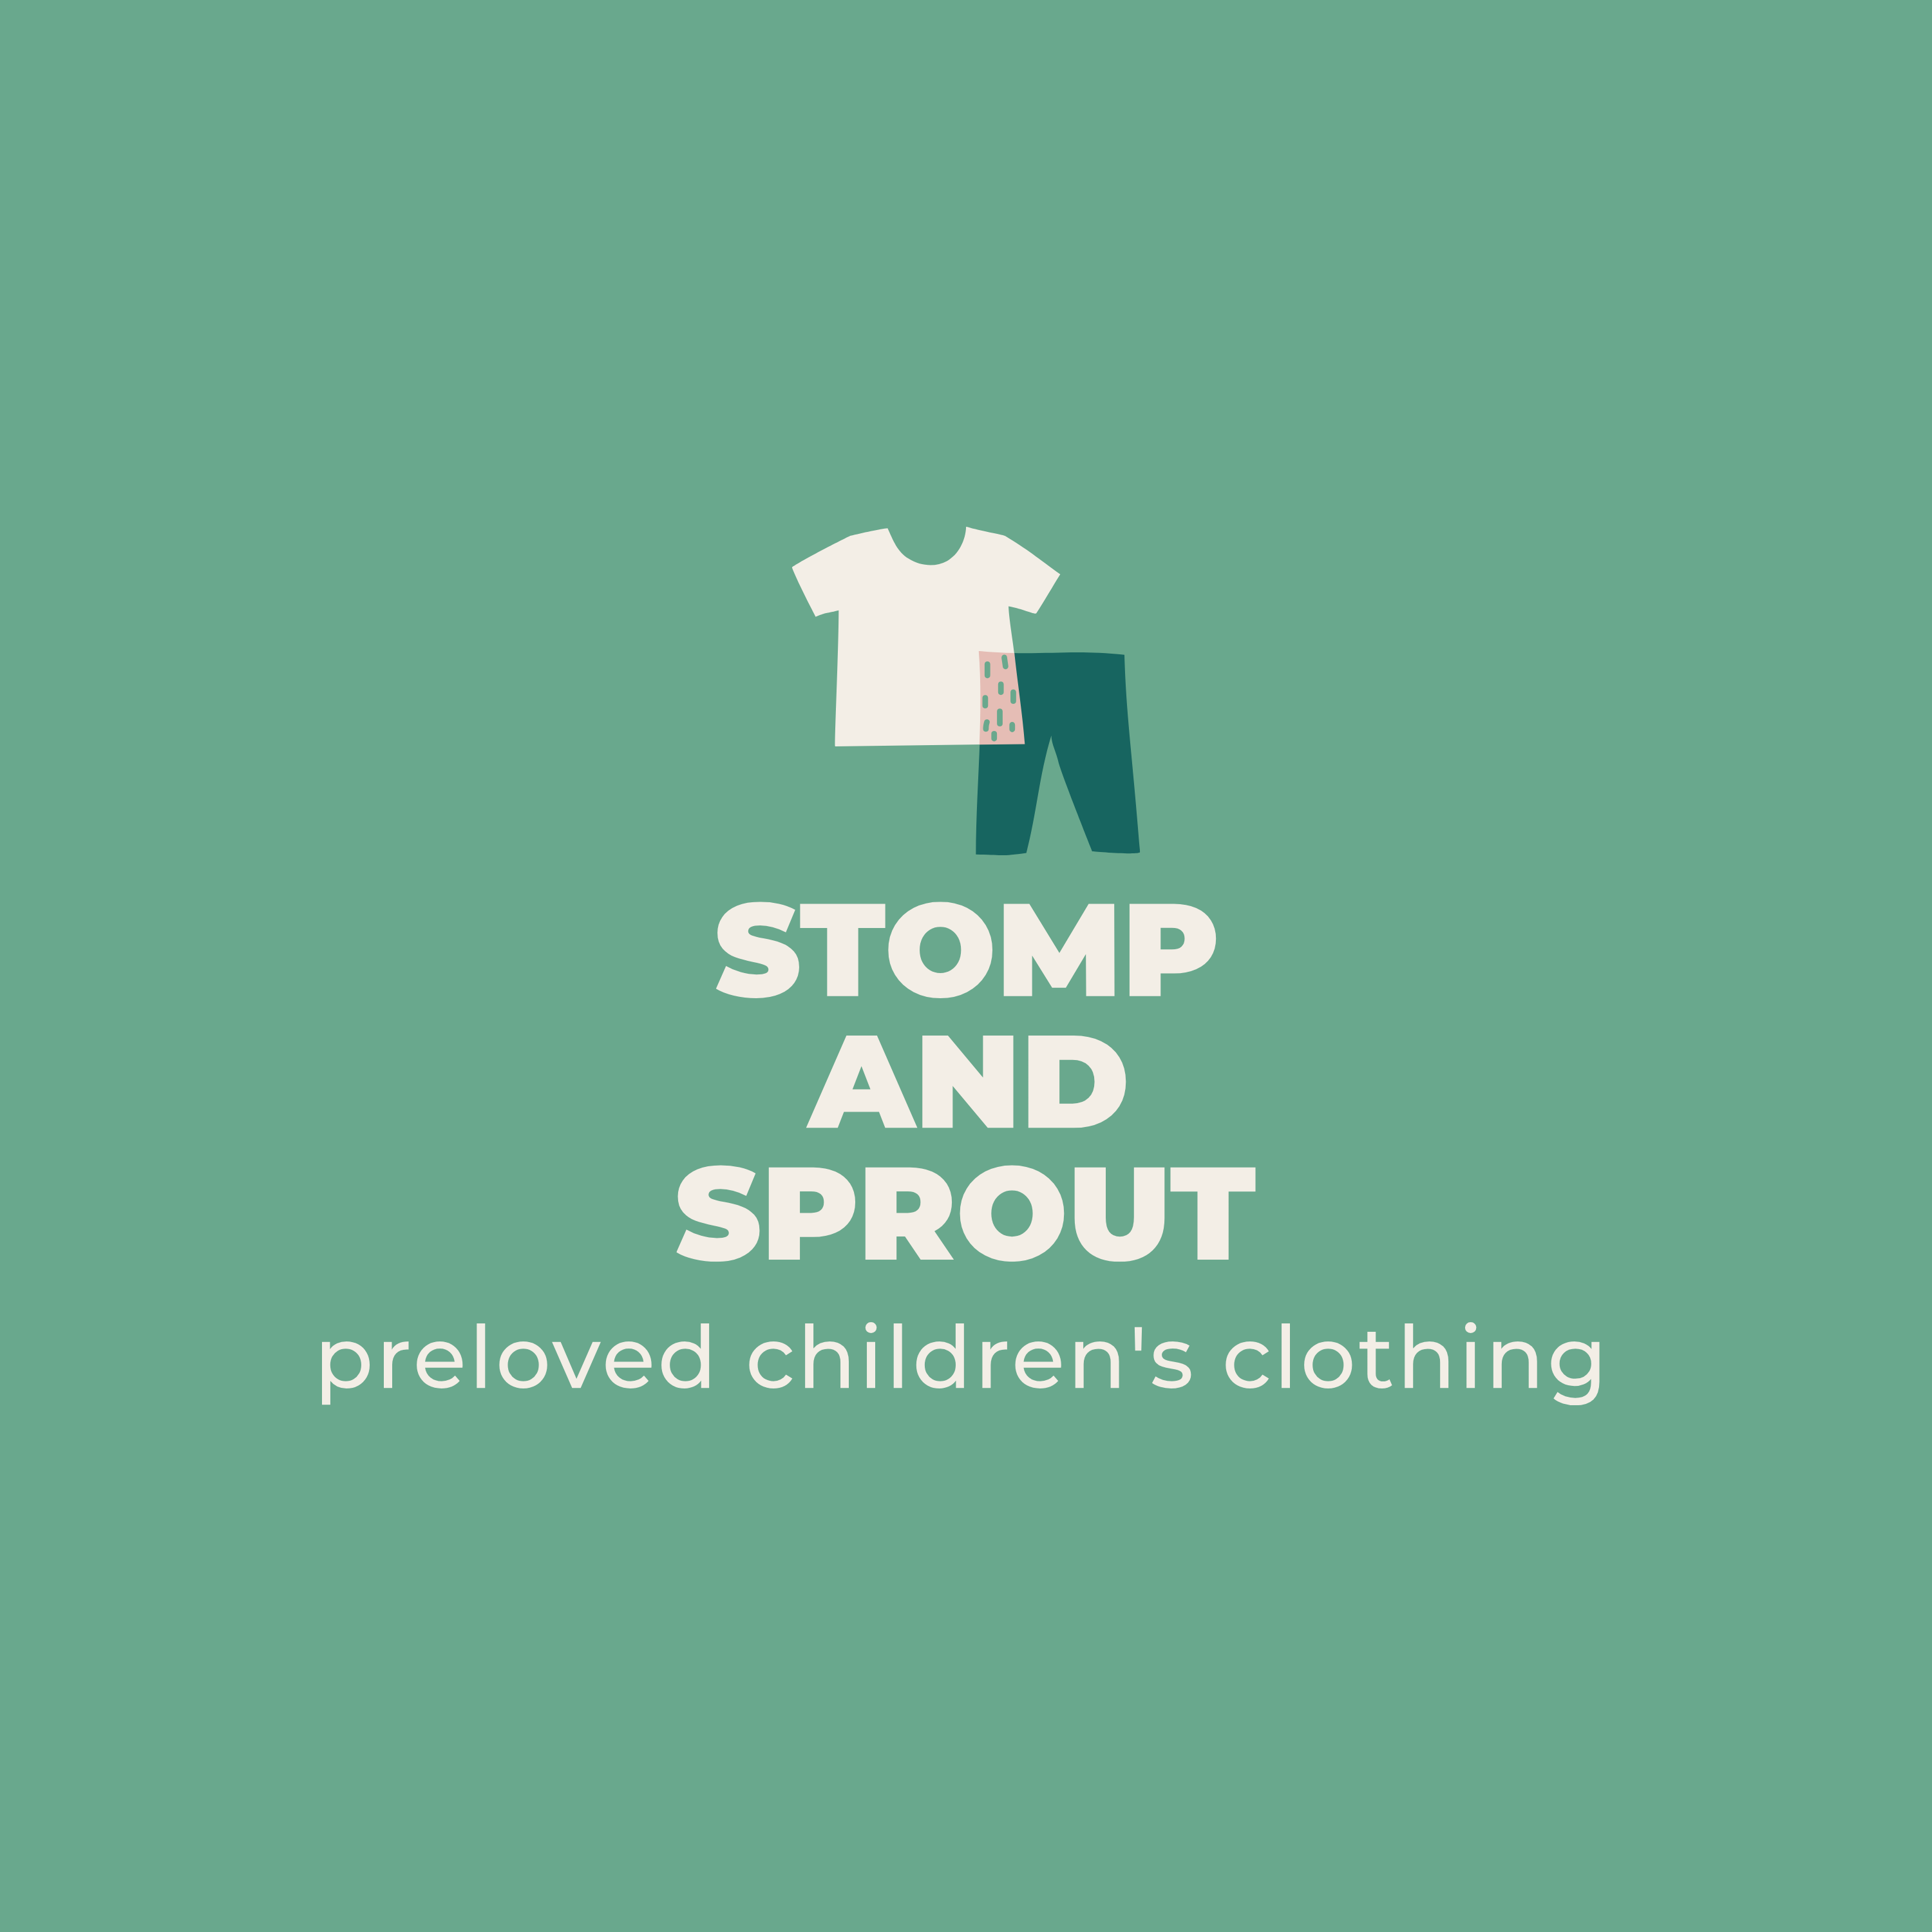 Image of a t shirt and pair of trousers, accompanied by the text: Stomp and Sprout preloved children's clothing